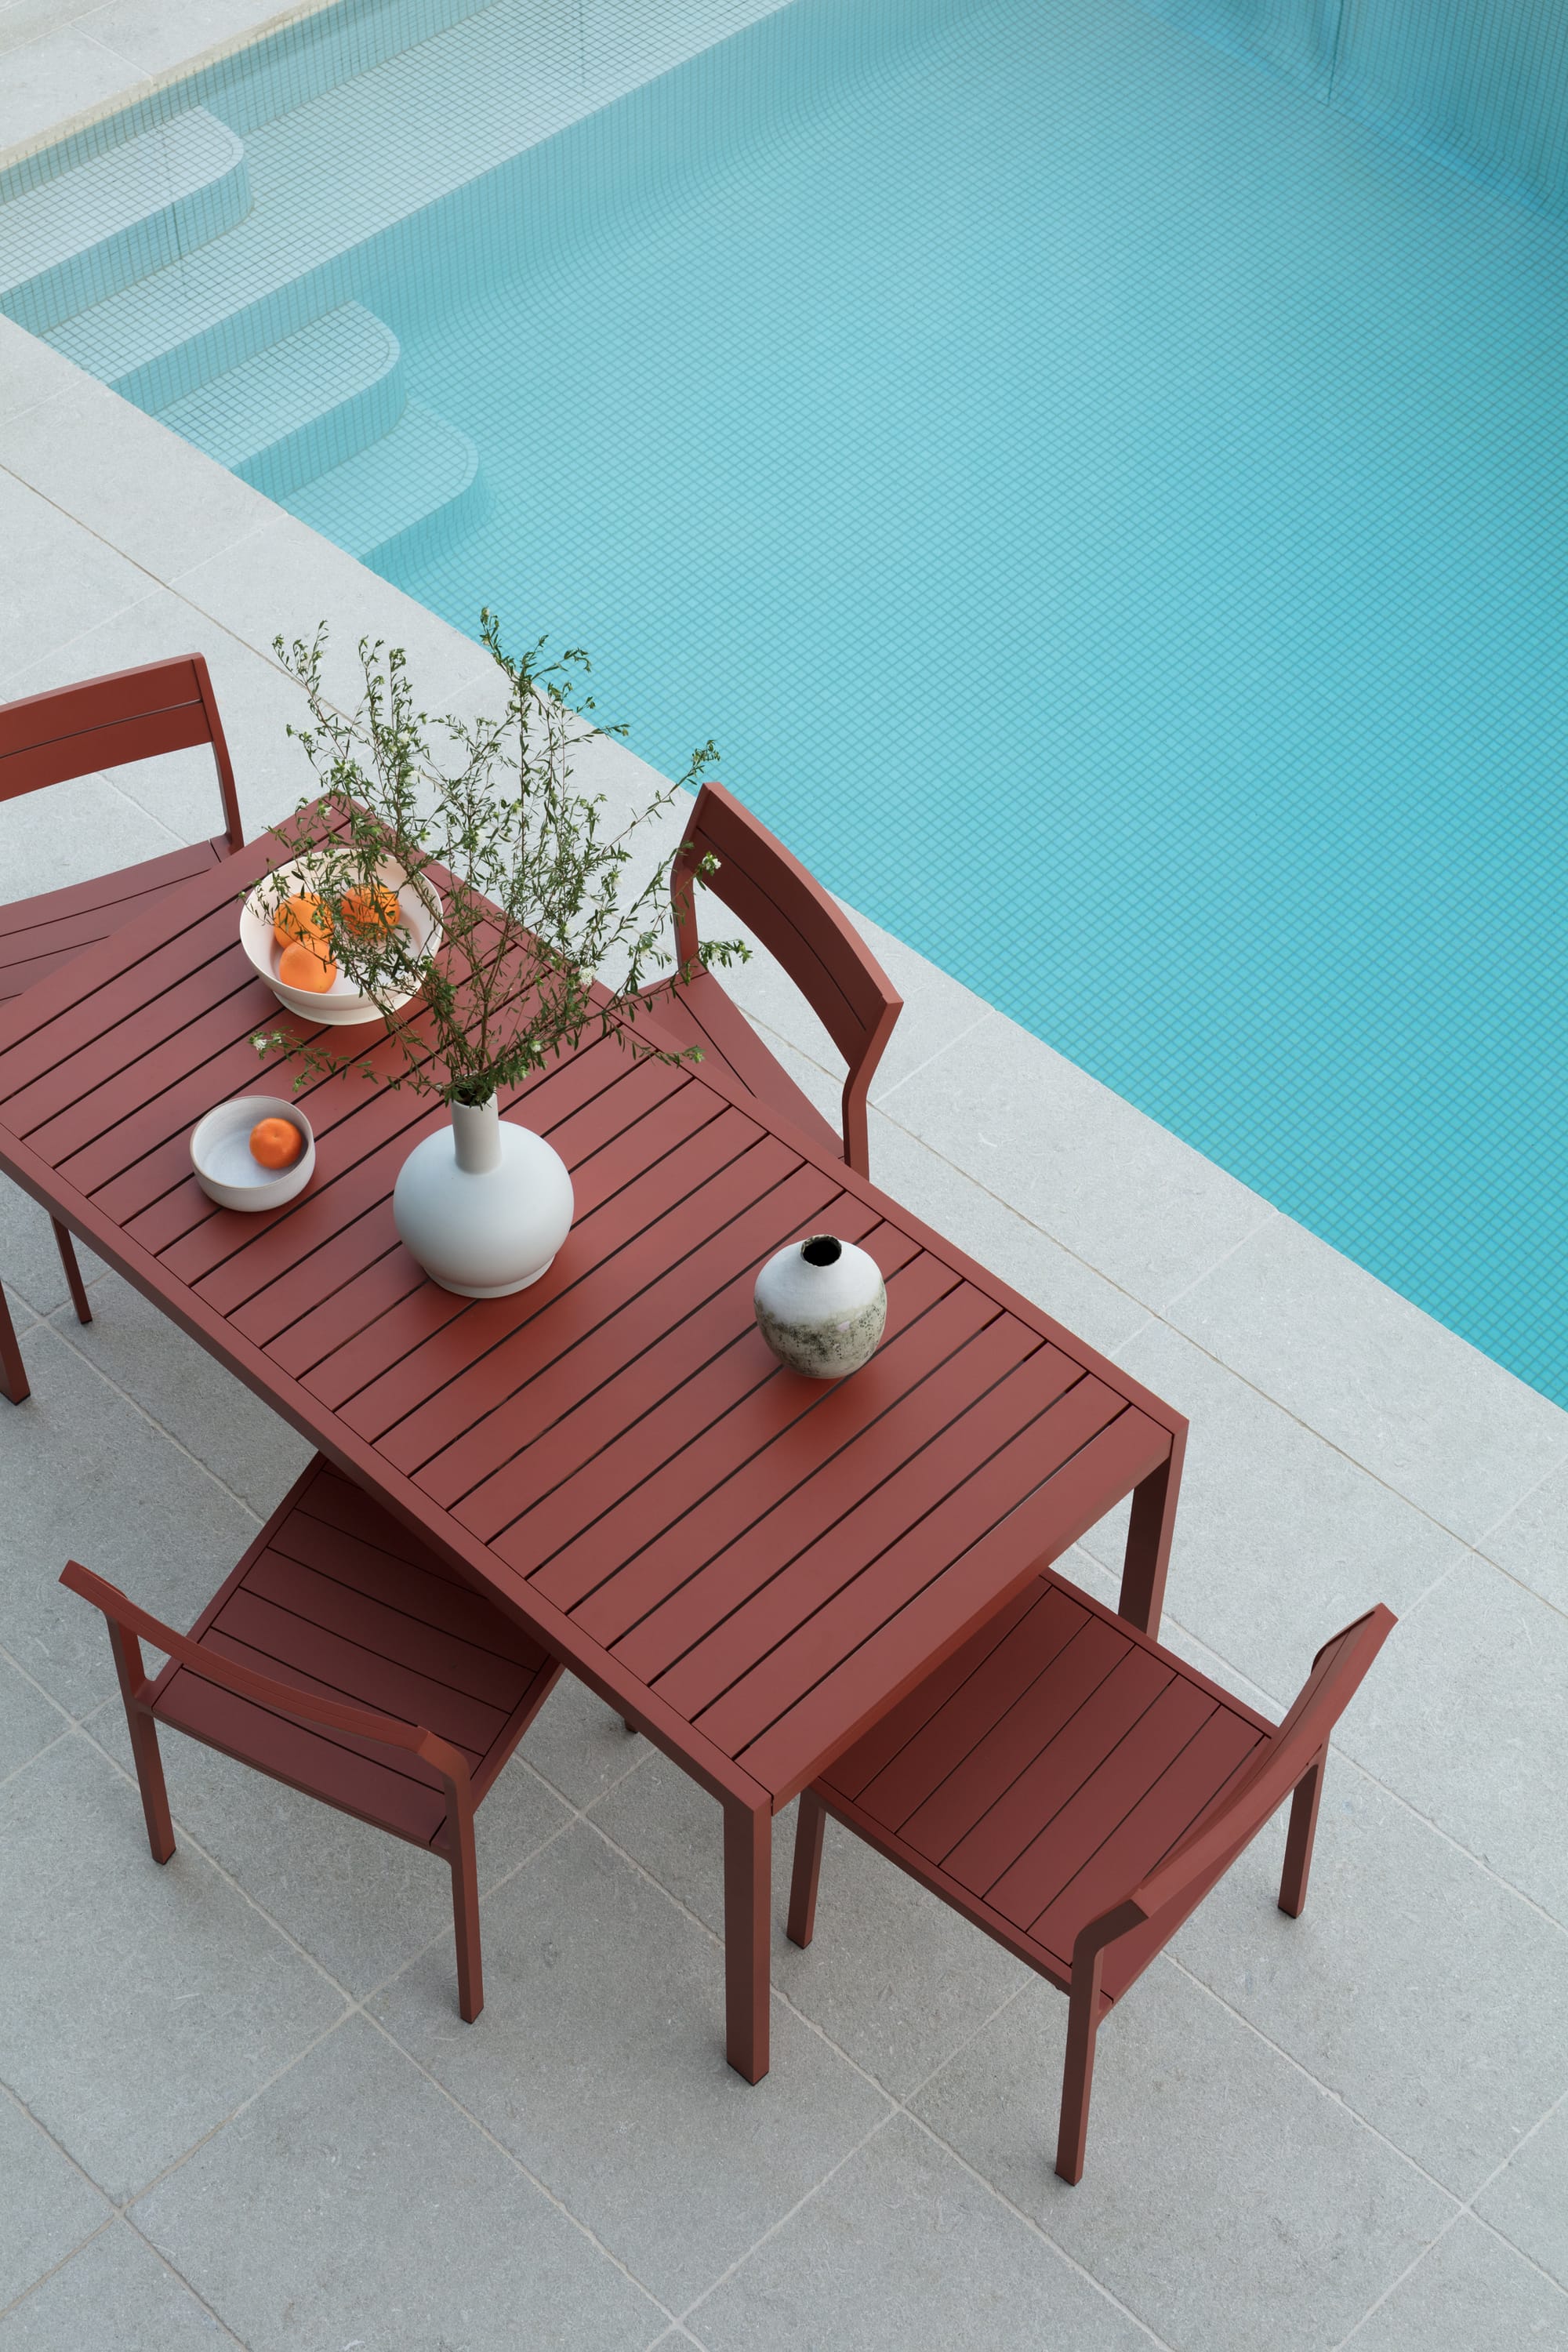 Grandview House by Ian Bennett Design Studio. Photography by Clinton Weaver. Birds eye view of terracotta red coloured outdoor dining set on pale tiles. Tiled pool to right of table. 